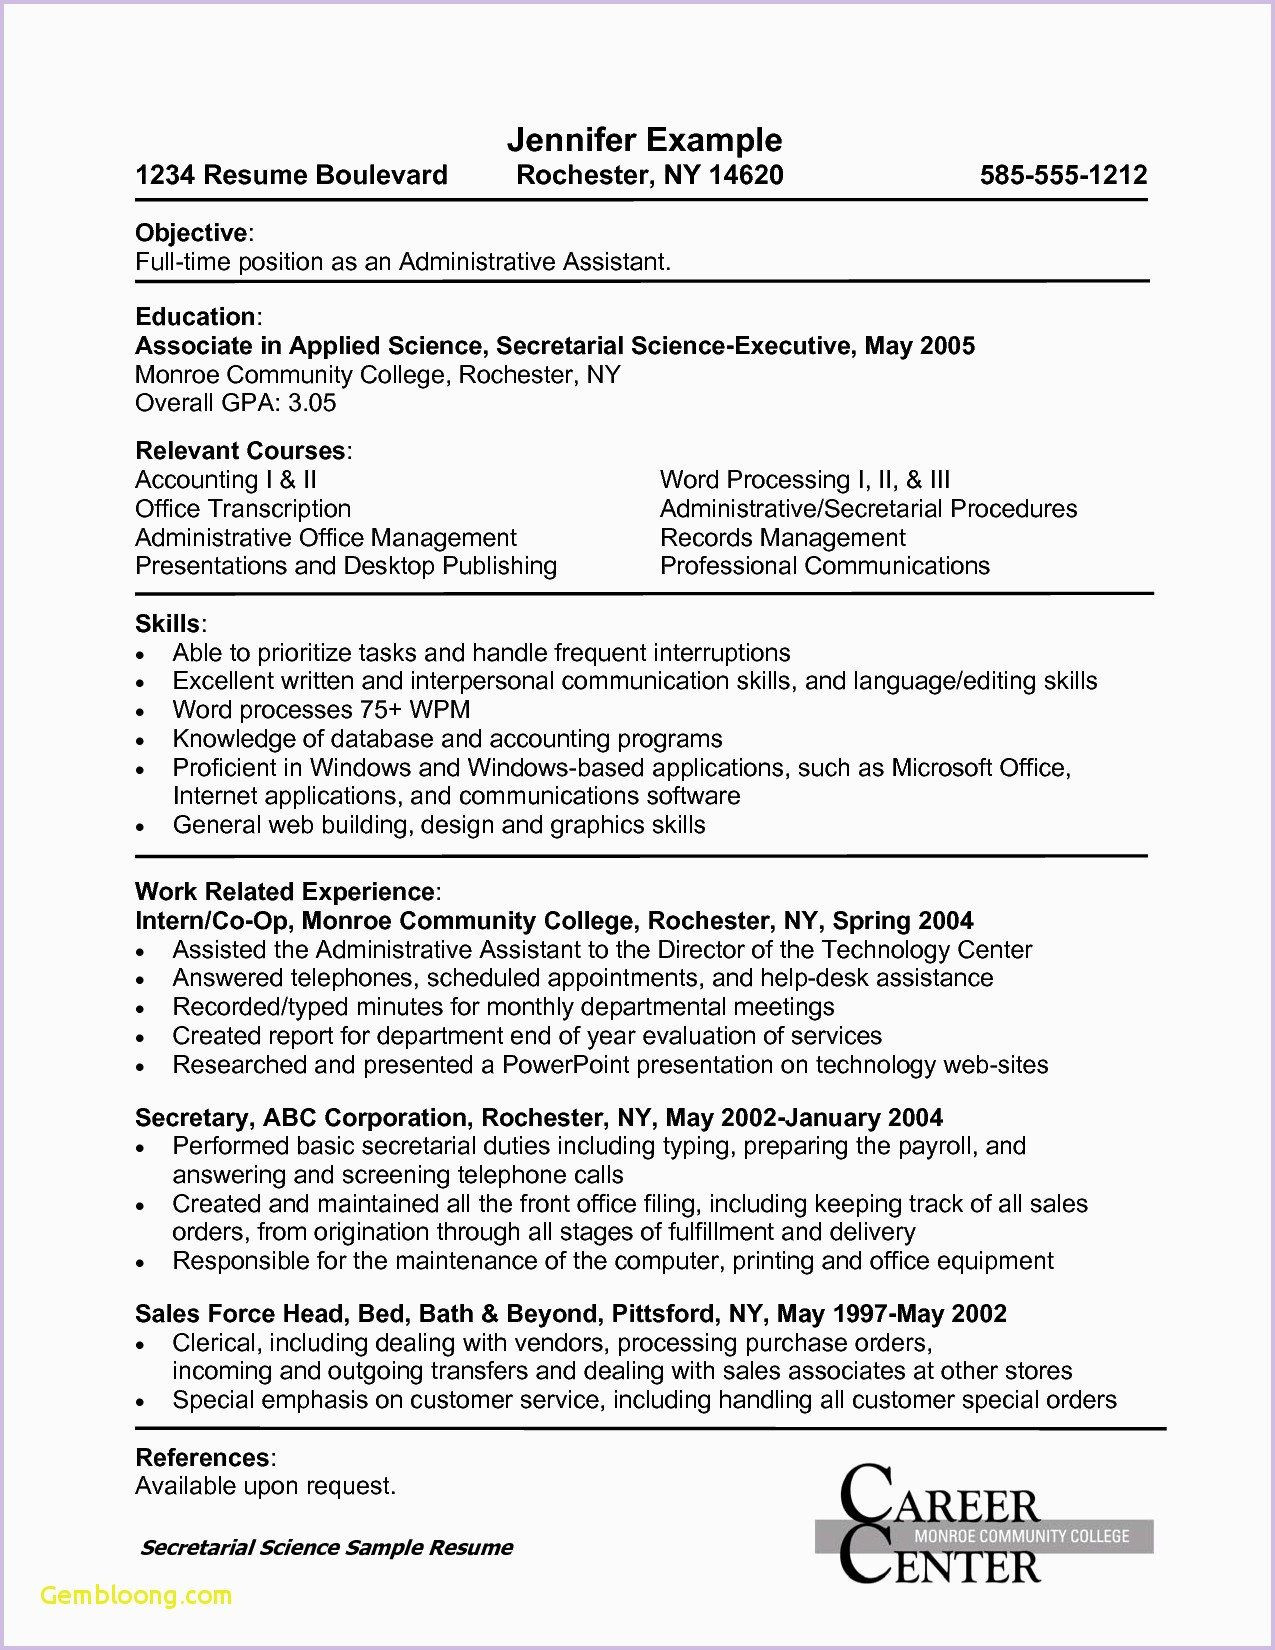 Resume Samples for Office assistant Job Office assistant Resume Examples Administrative assistant Resume …